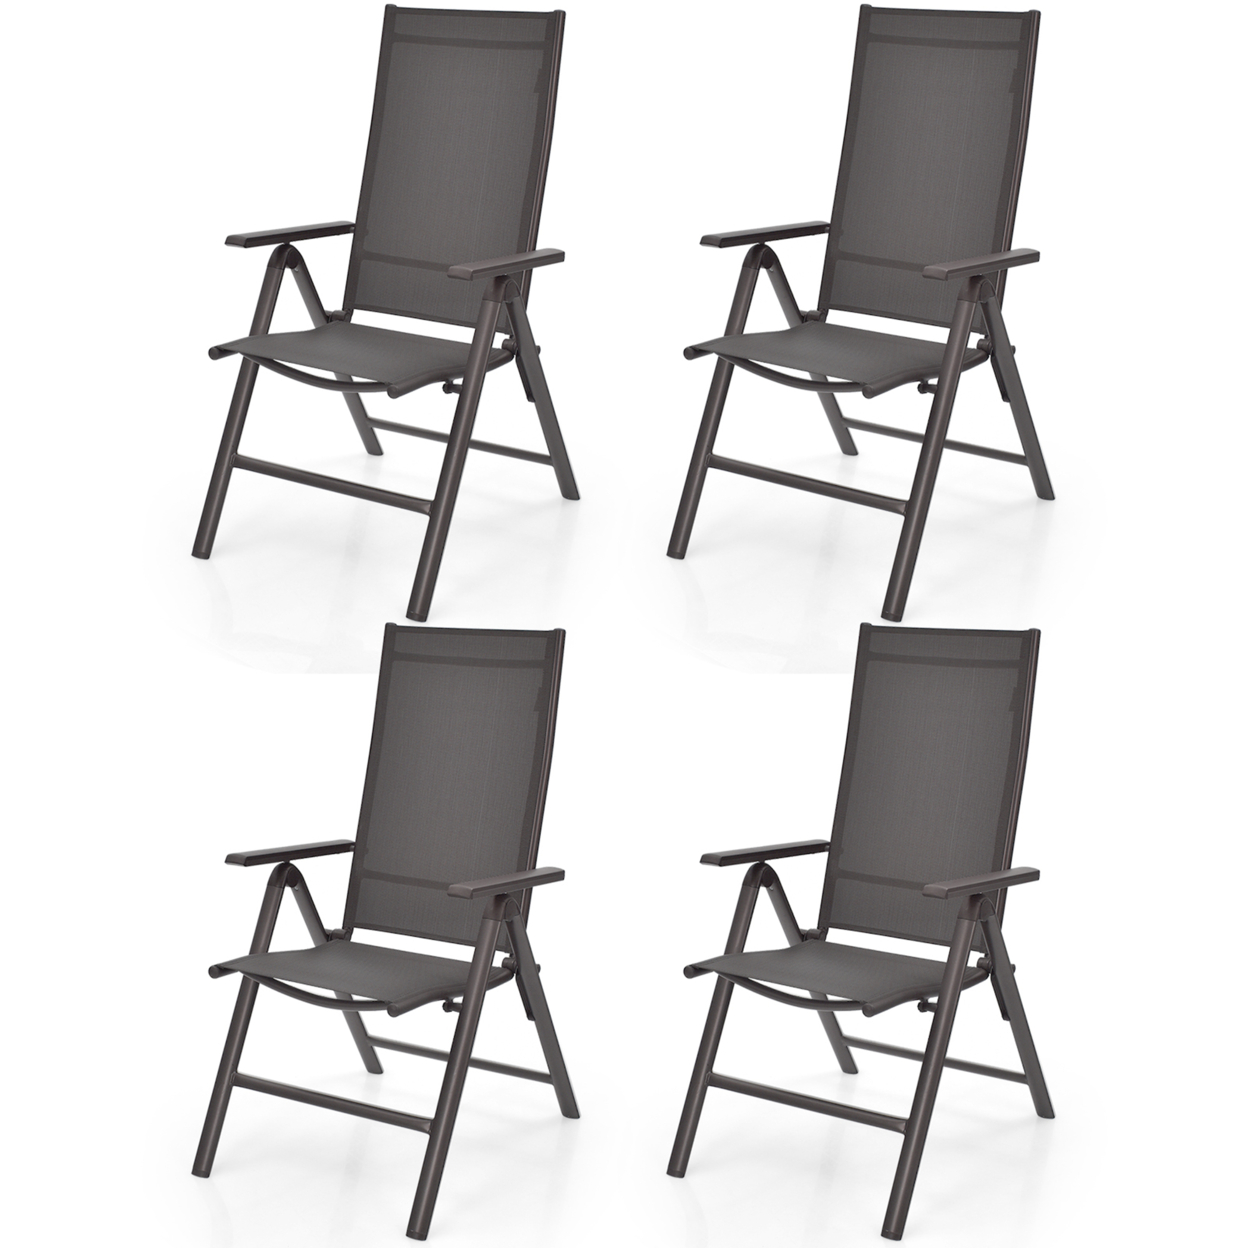 Set Of 4 Folding Patio Dining Chair Camping Chair W/ Adjustable Backrest